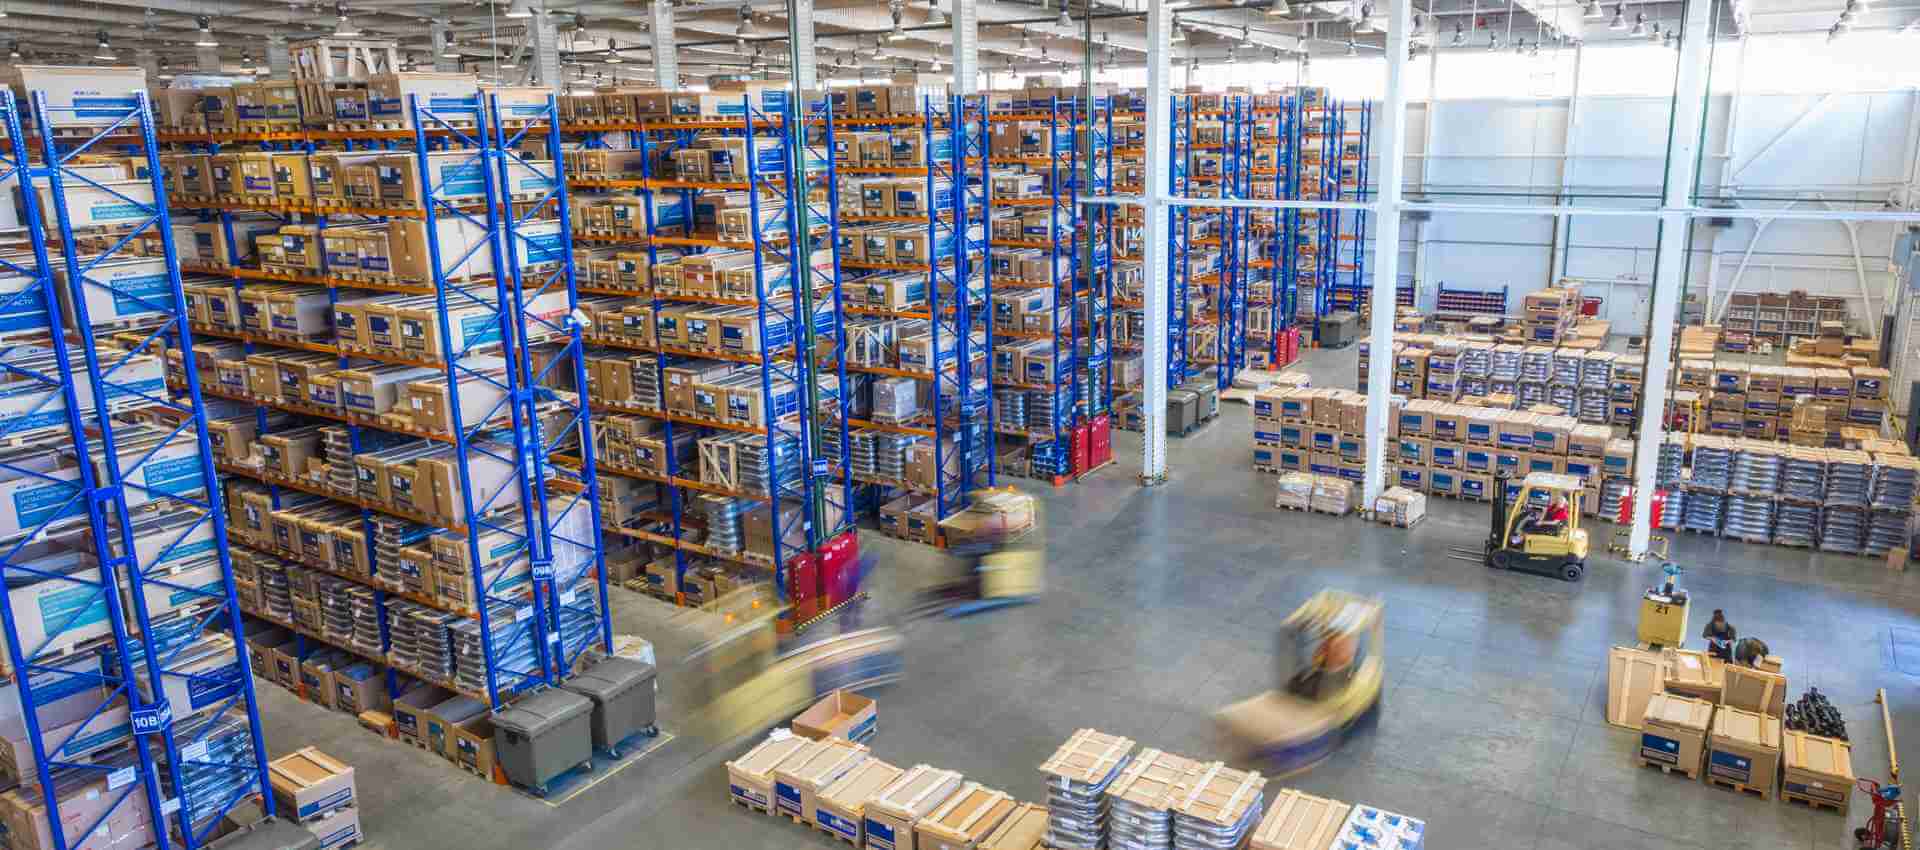 How to Streamline the Warehouse, Office, or House With Latest Technology